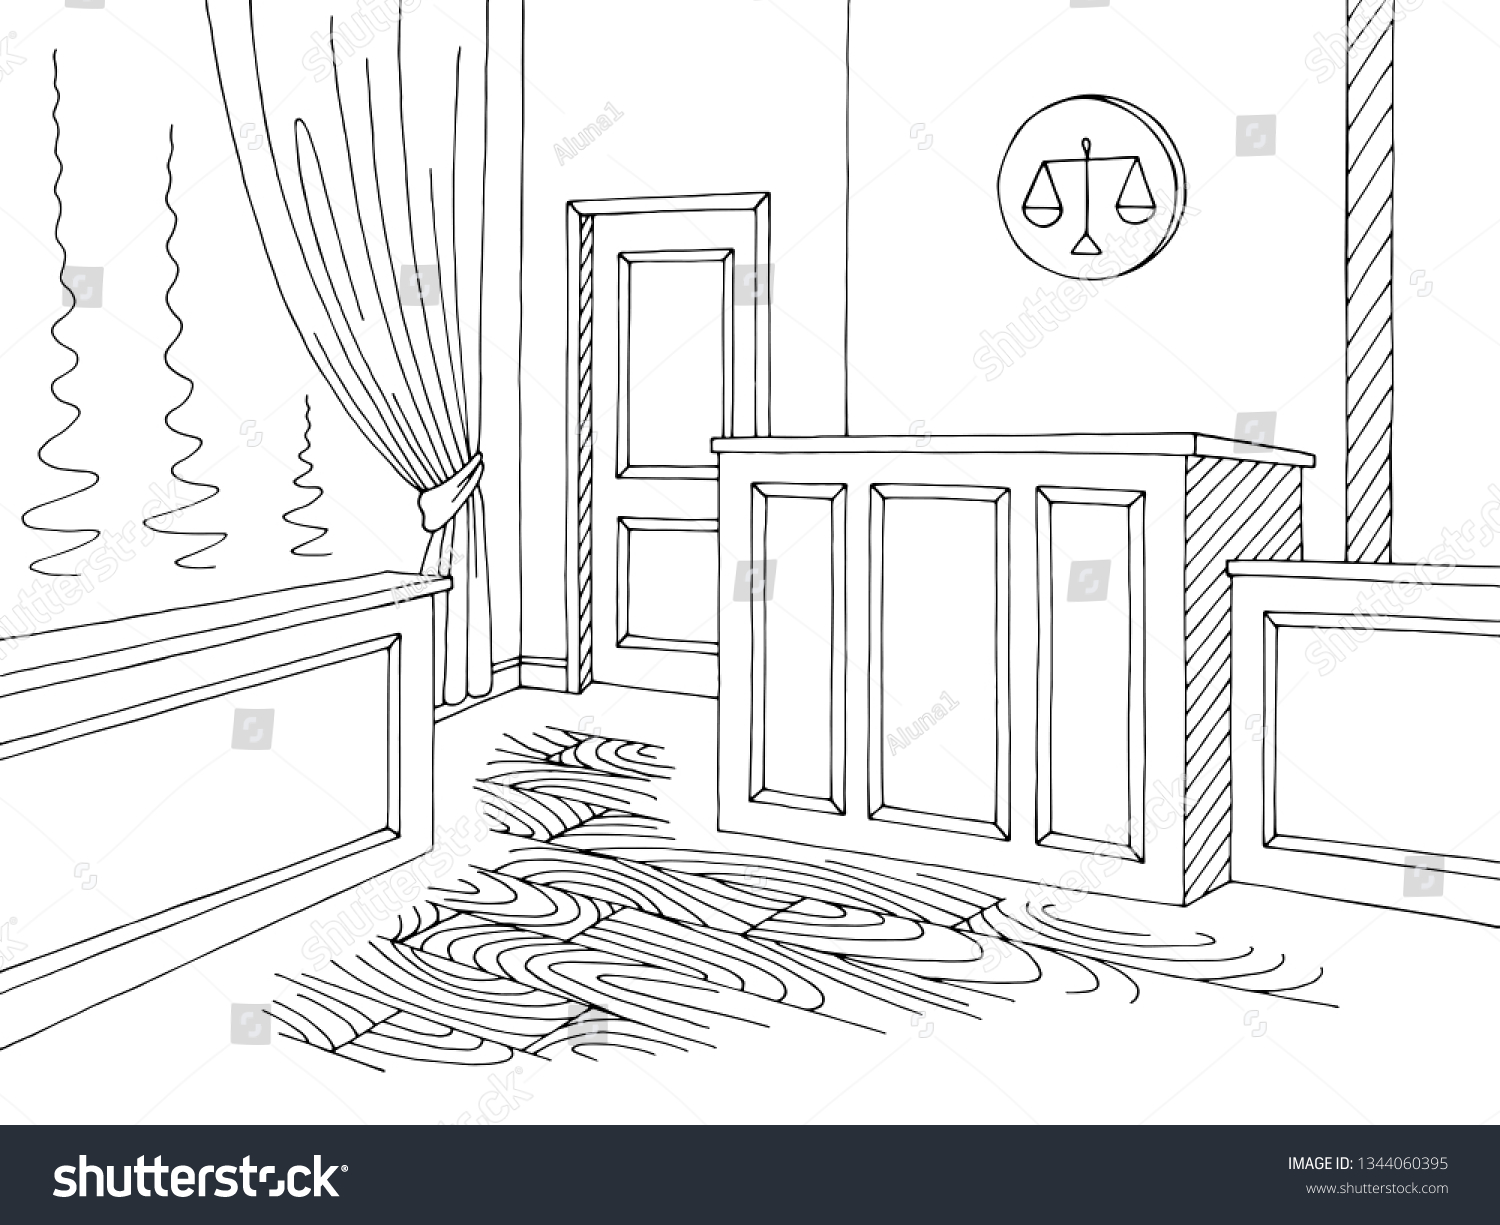 Courtroom drawing Images, Stock Photos & Vectors Shutterstock